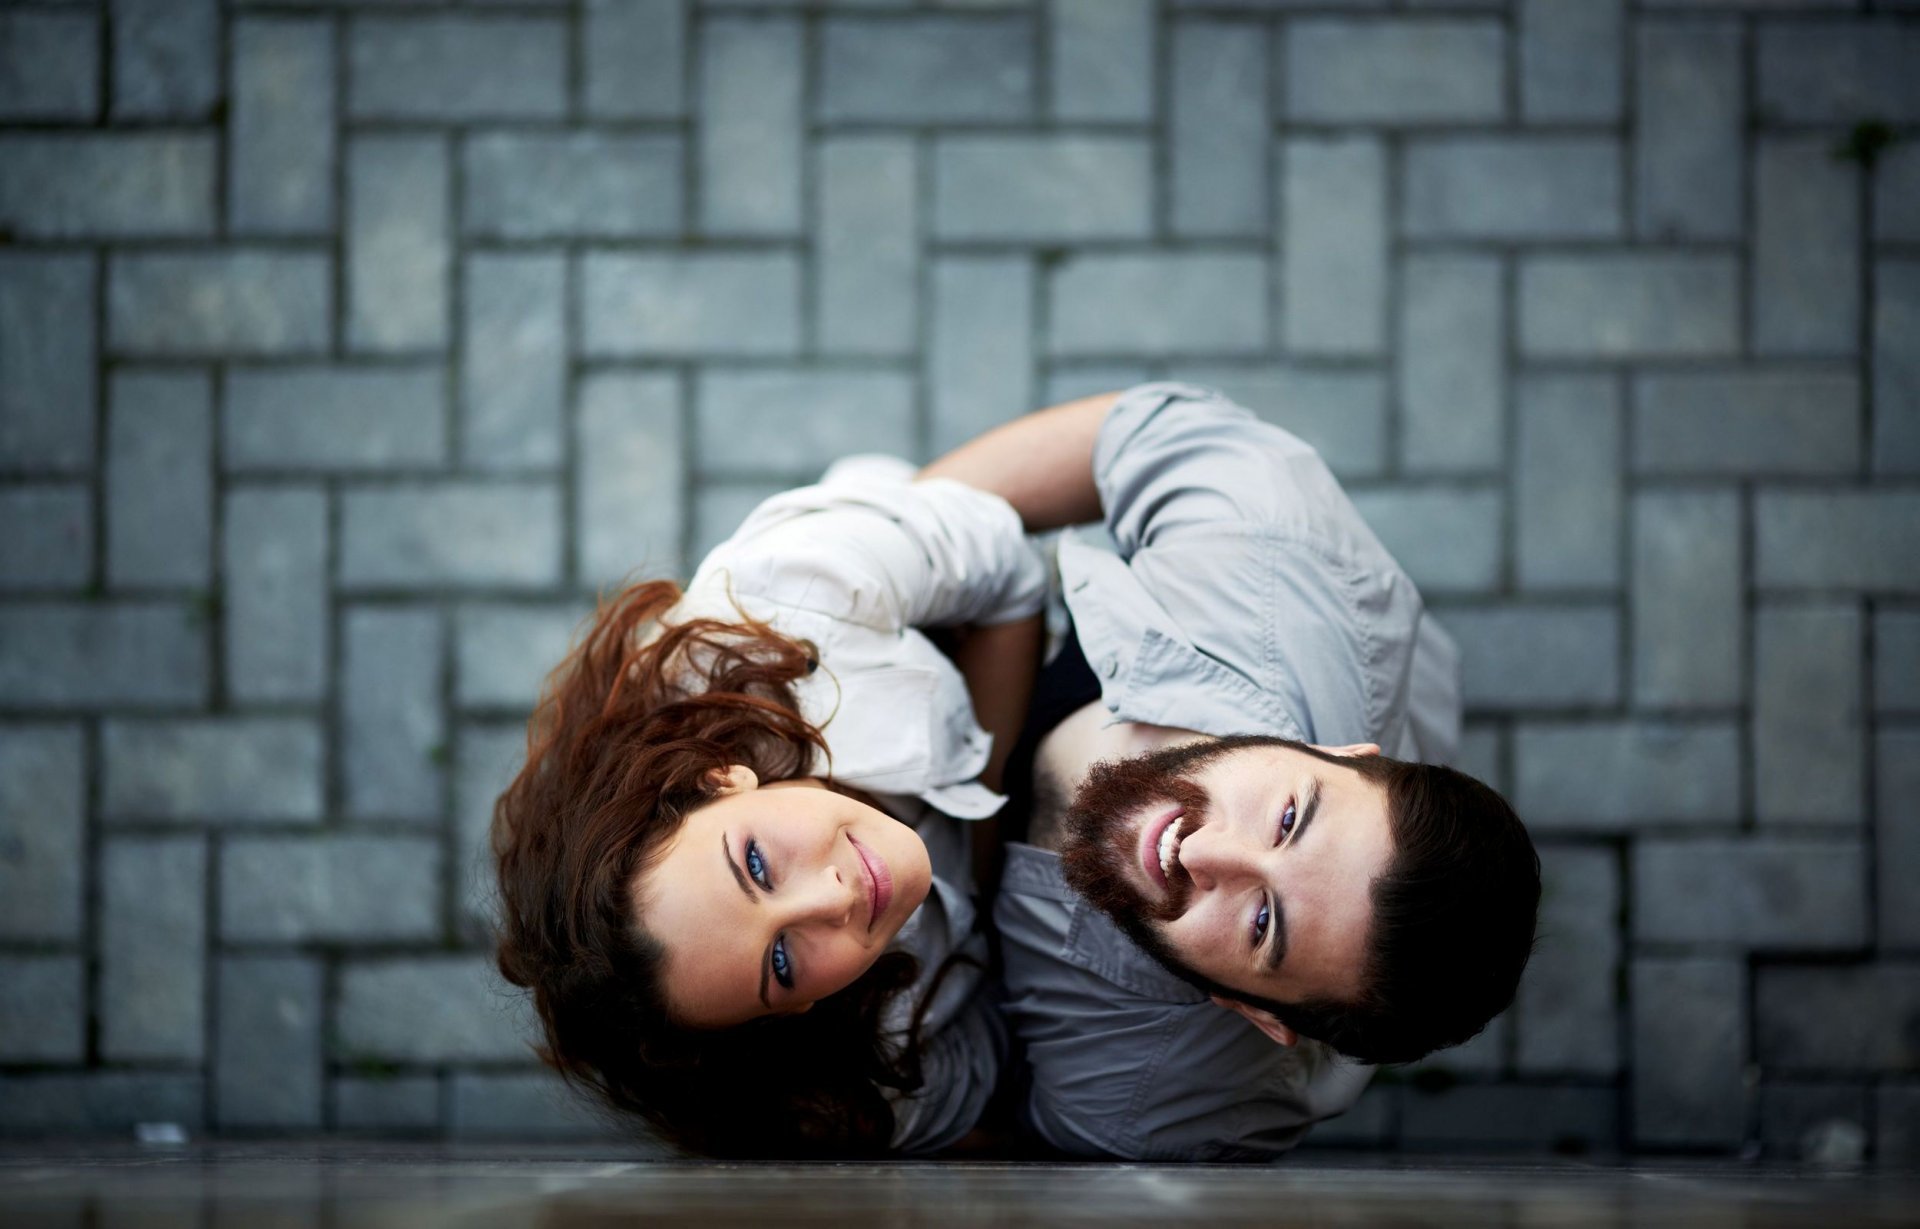 Download-Free-Love-Hug-Couples-HD-Wallpaper - Tricity Chandigarh